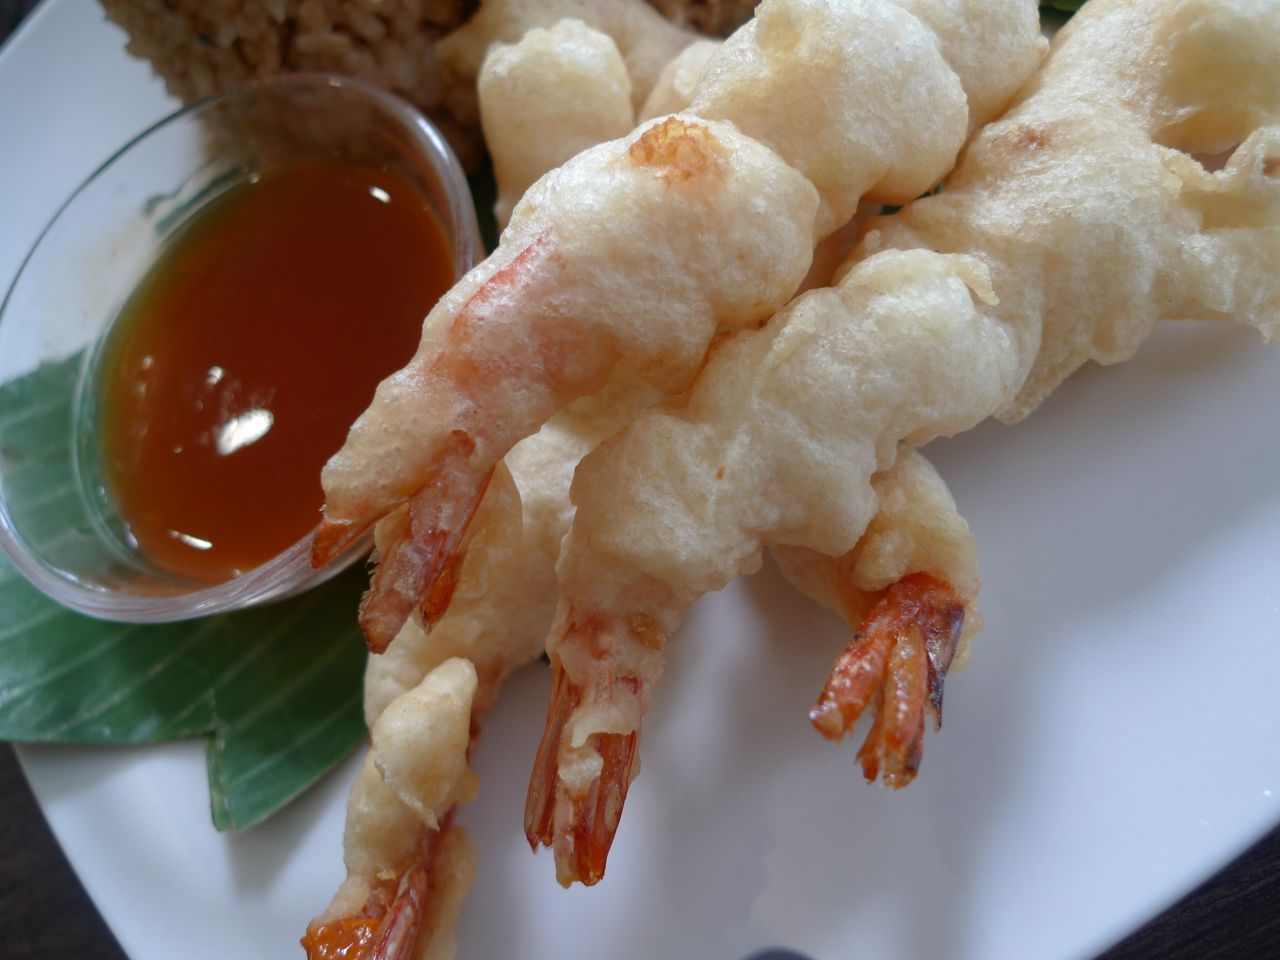 This deep-fried shrimp dish is typically served with a tomato-based sweet and sour sauce.